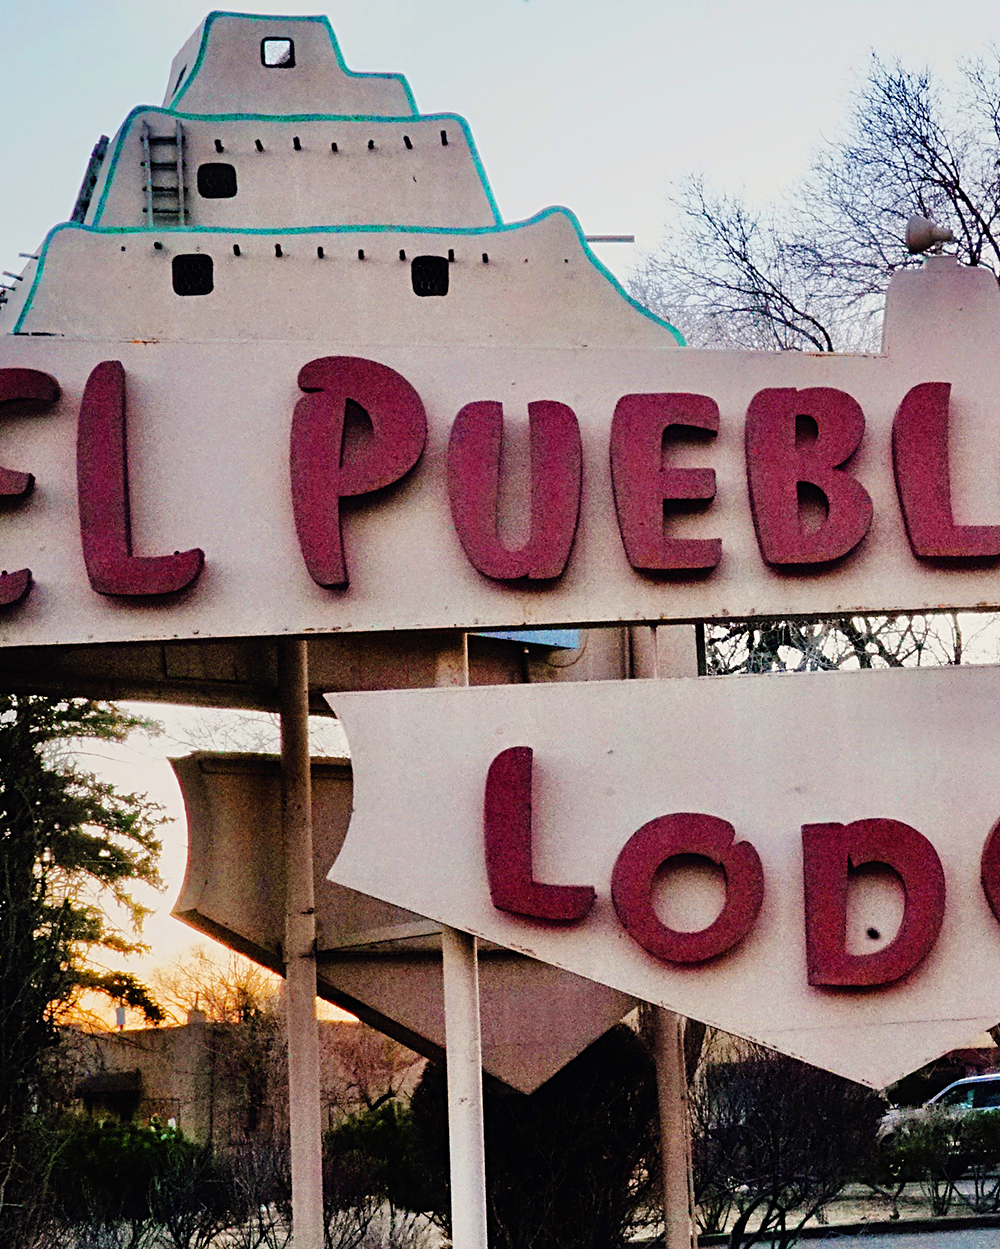 Collection 104+ Images l+pueblo+lodge+taos+new+mexico+united+states+of+america Sharp